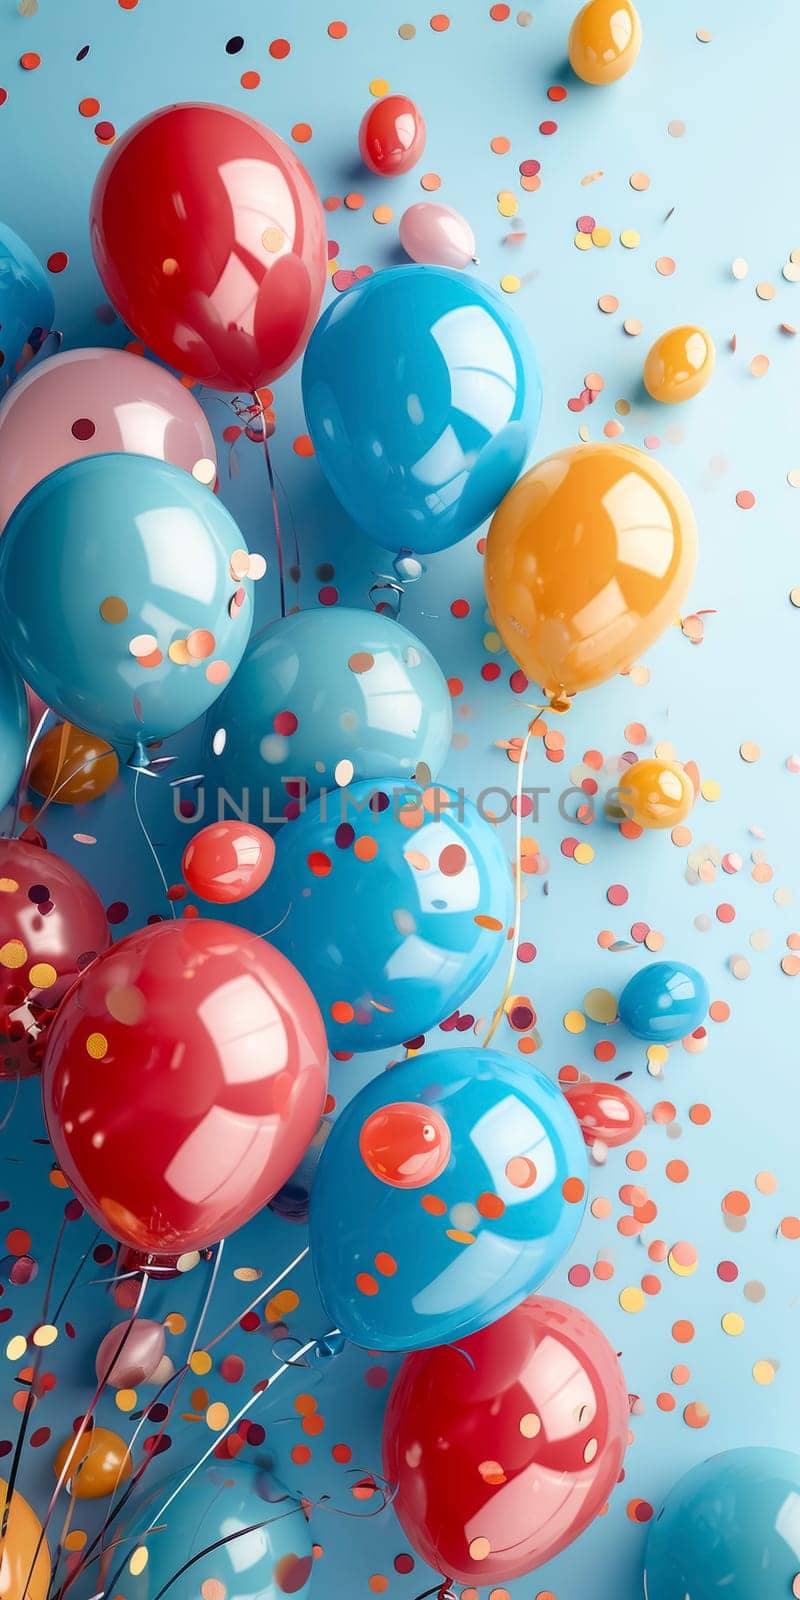 Bunch of balloons with confetti. 3D illustration with vibrant colors. Celebration and party decoration concept for design and print. Vertical composition with copy space.